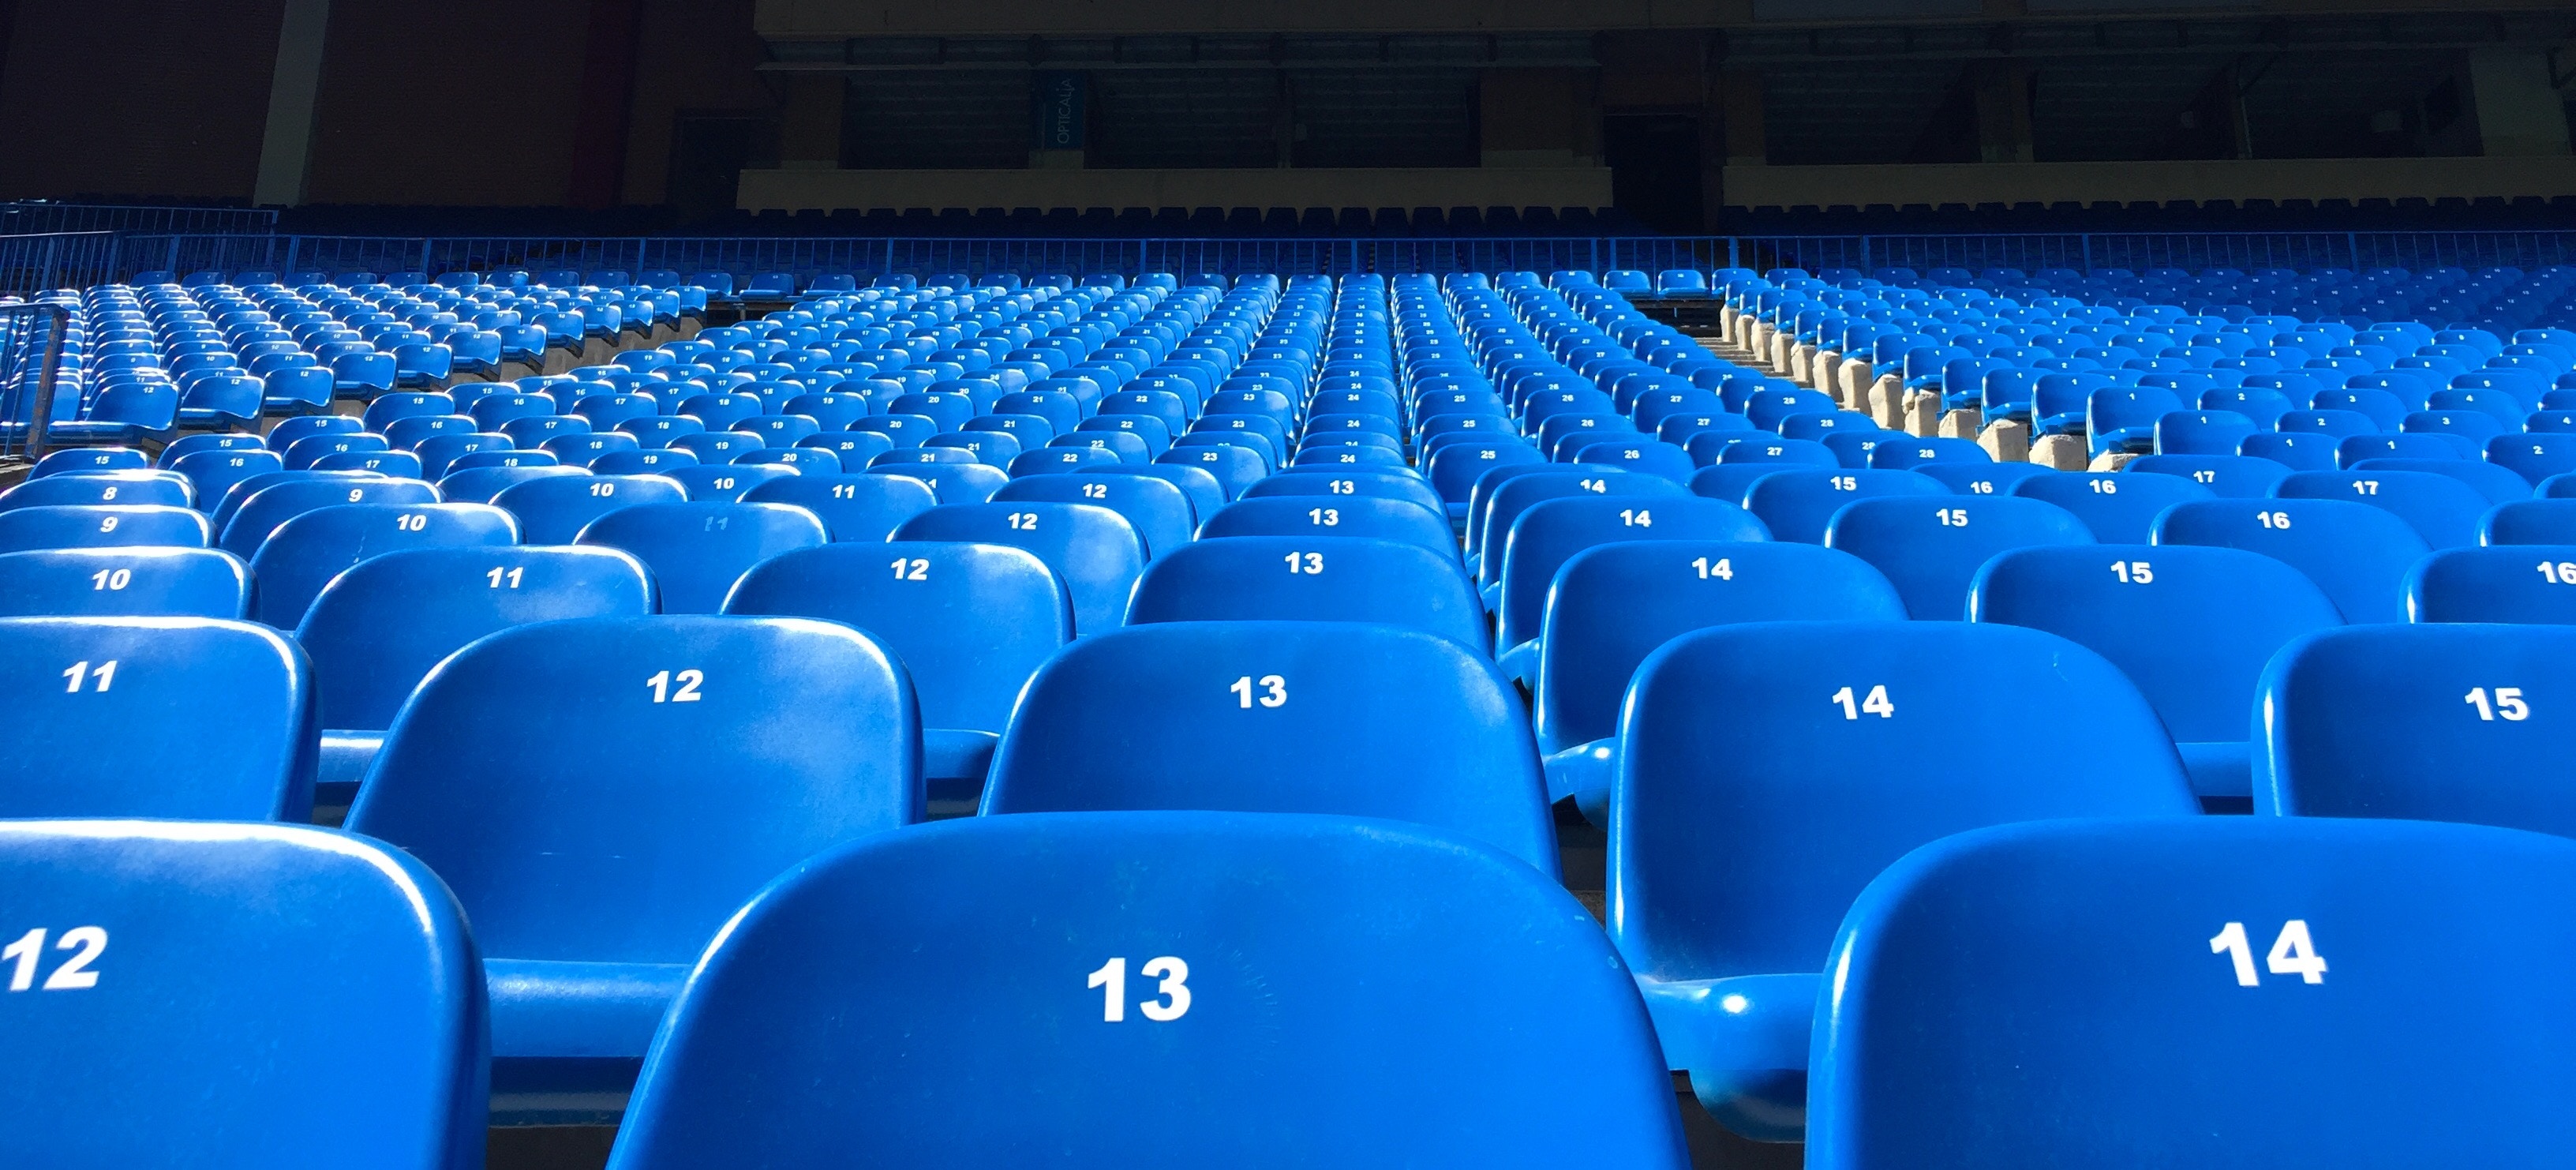 Column and Row Empty Seats Photo by Florian Müller on Unsplash